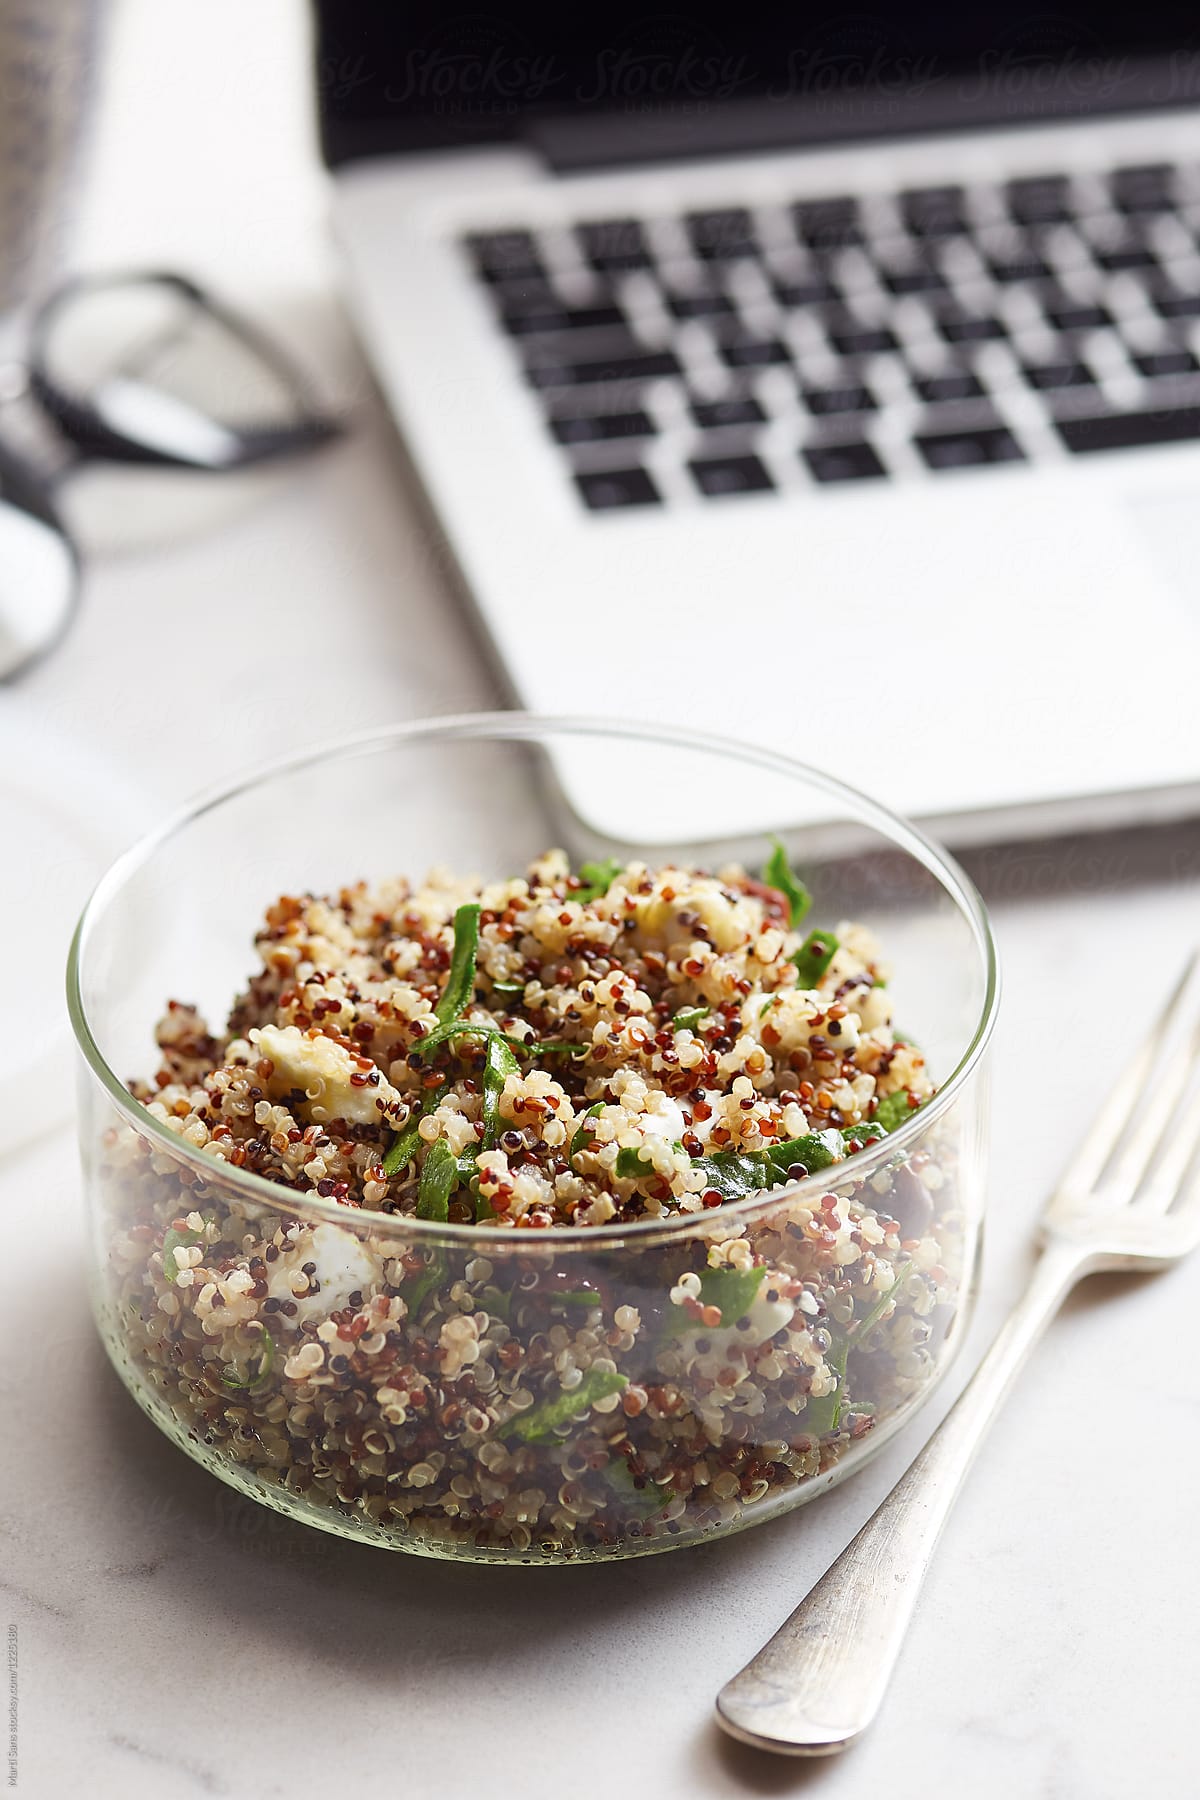 Quinoa salad with goat cheese and olive on office desk